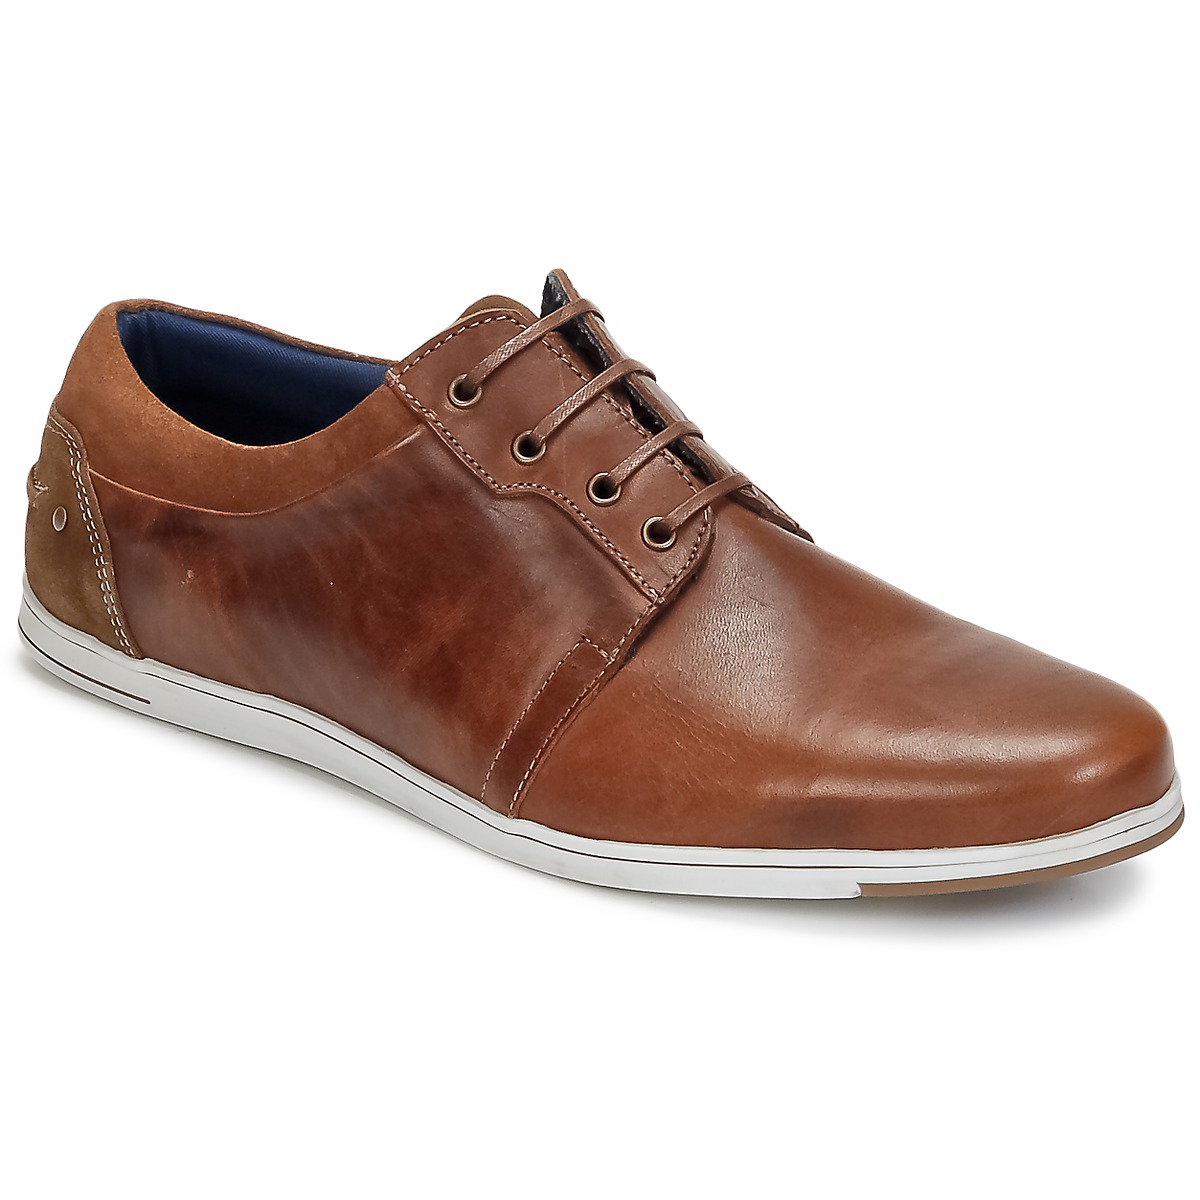 Chaussures Homme The Indian Face COONETTE Camel